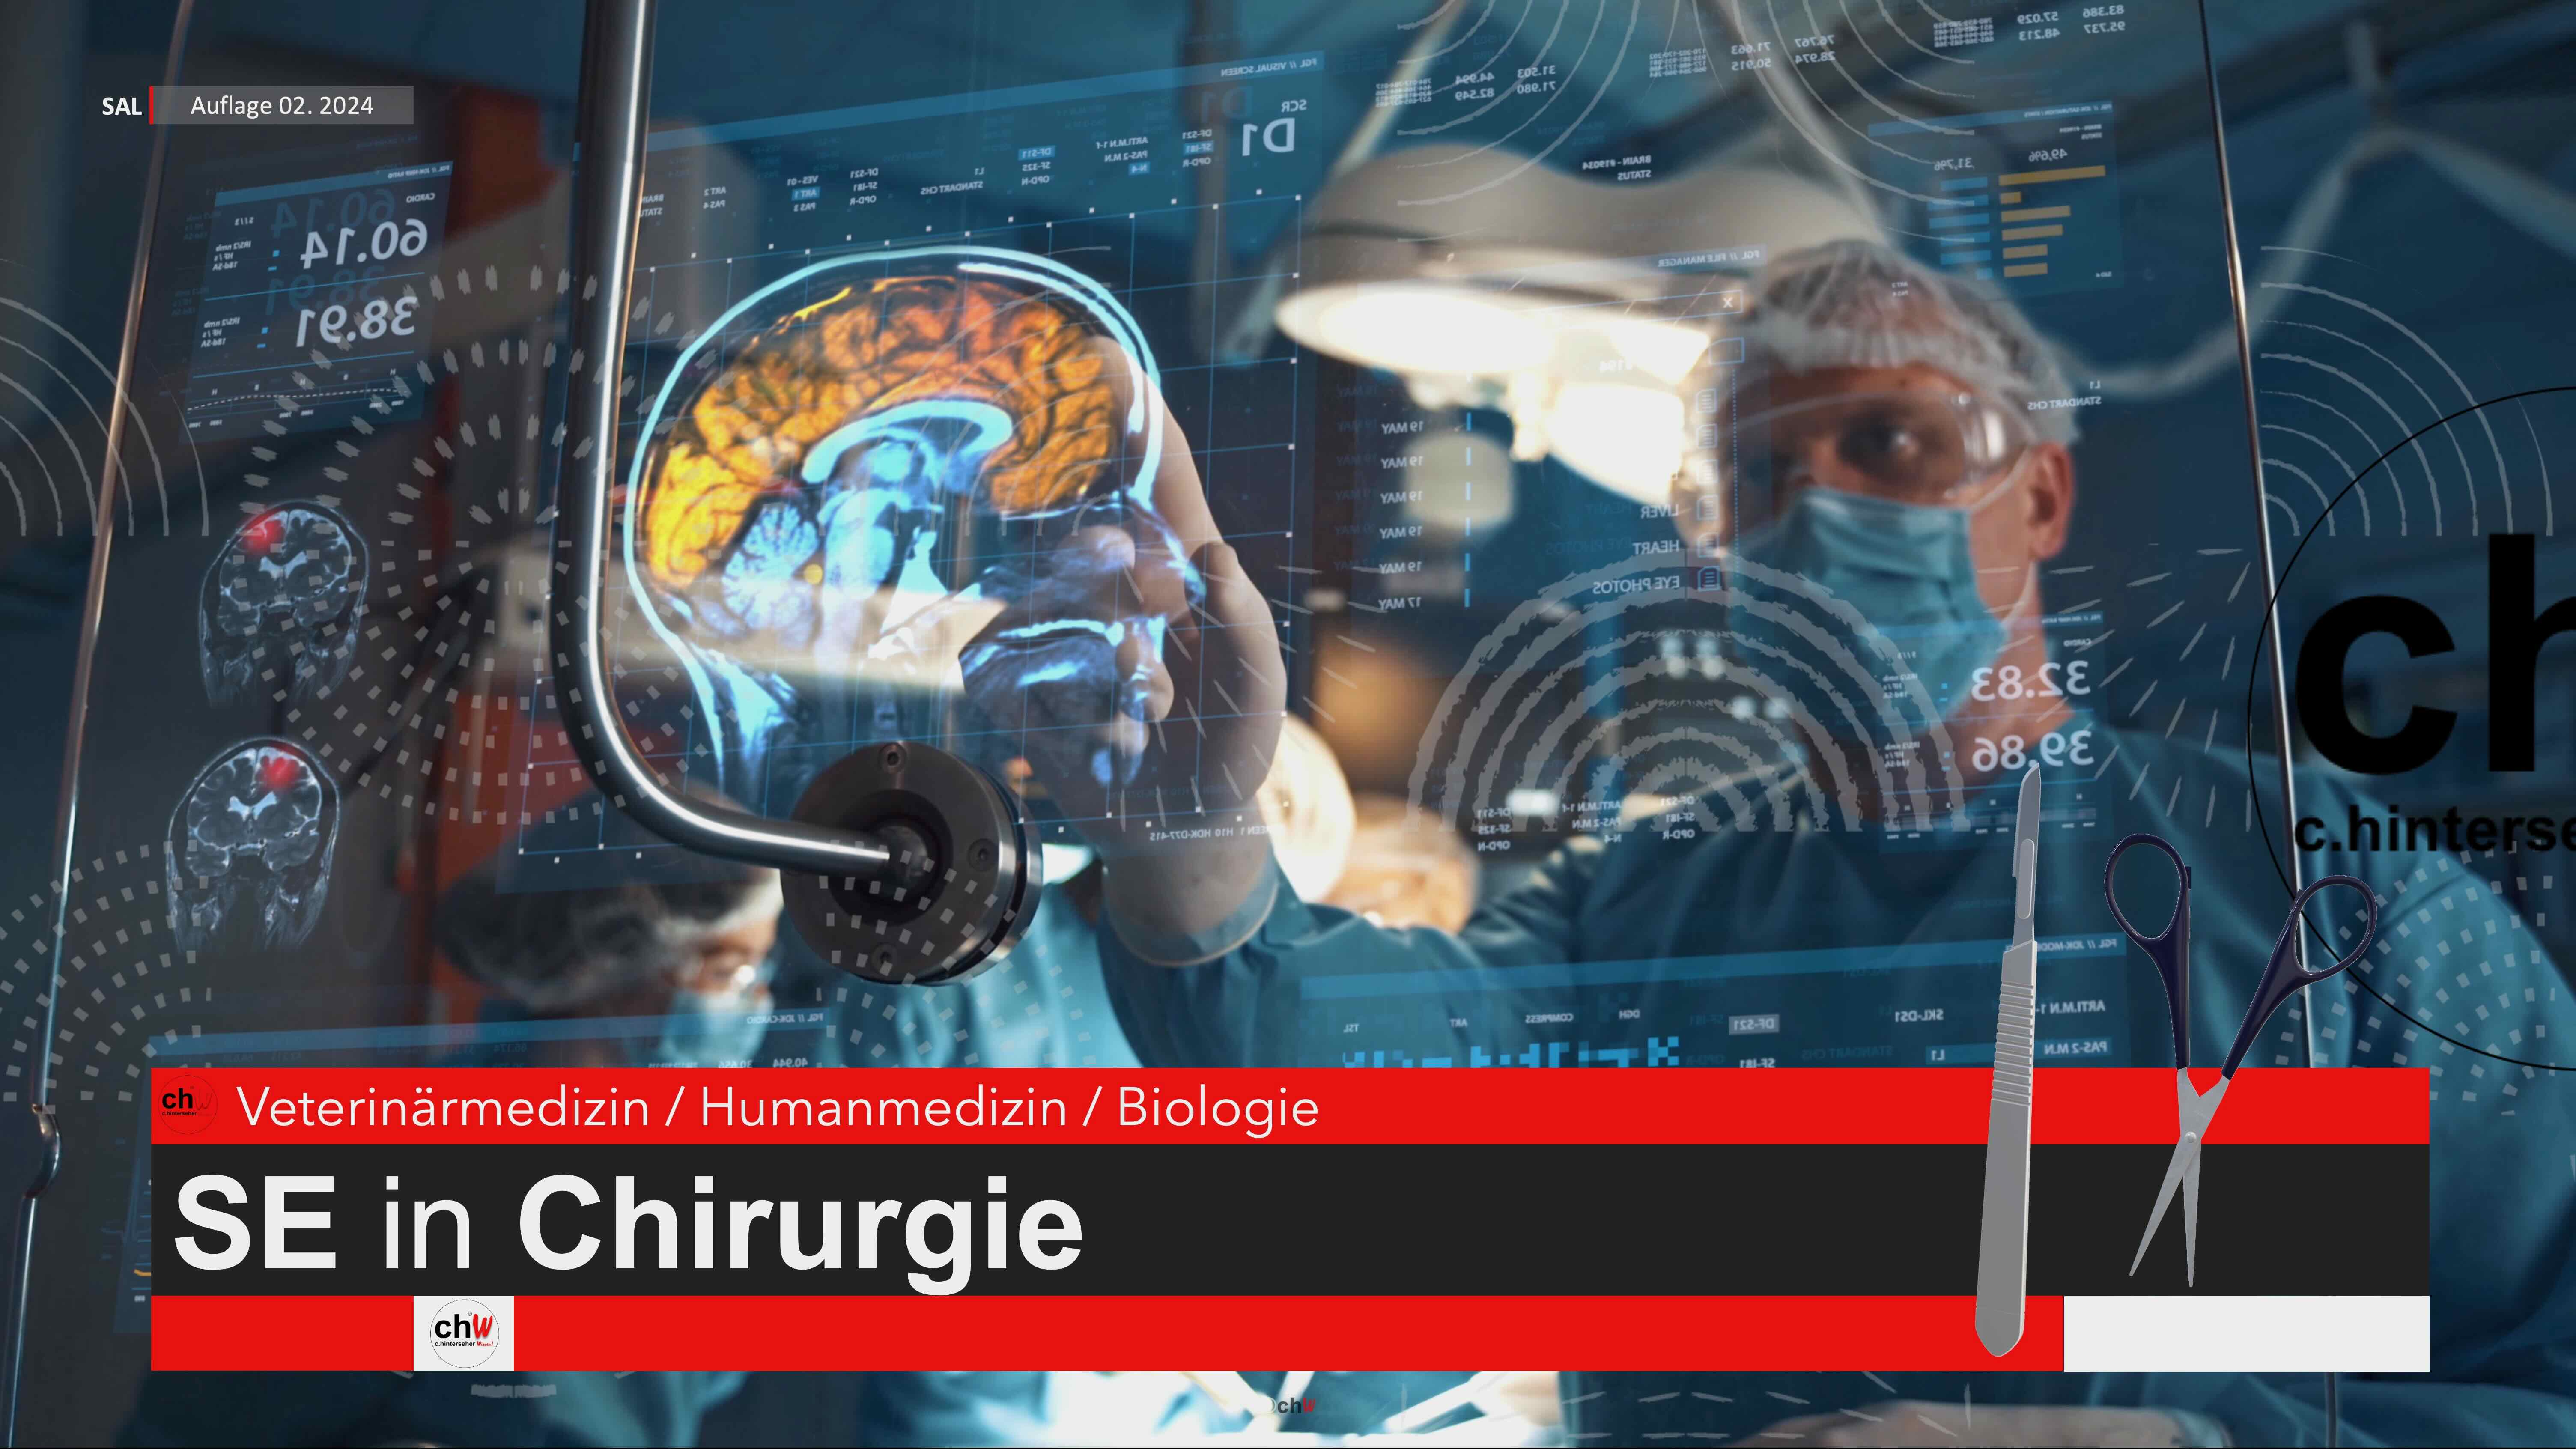 chW SE in Chirurgie